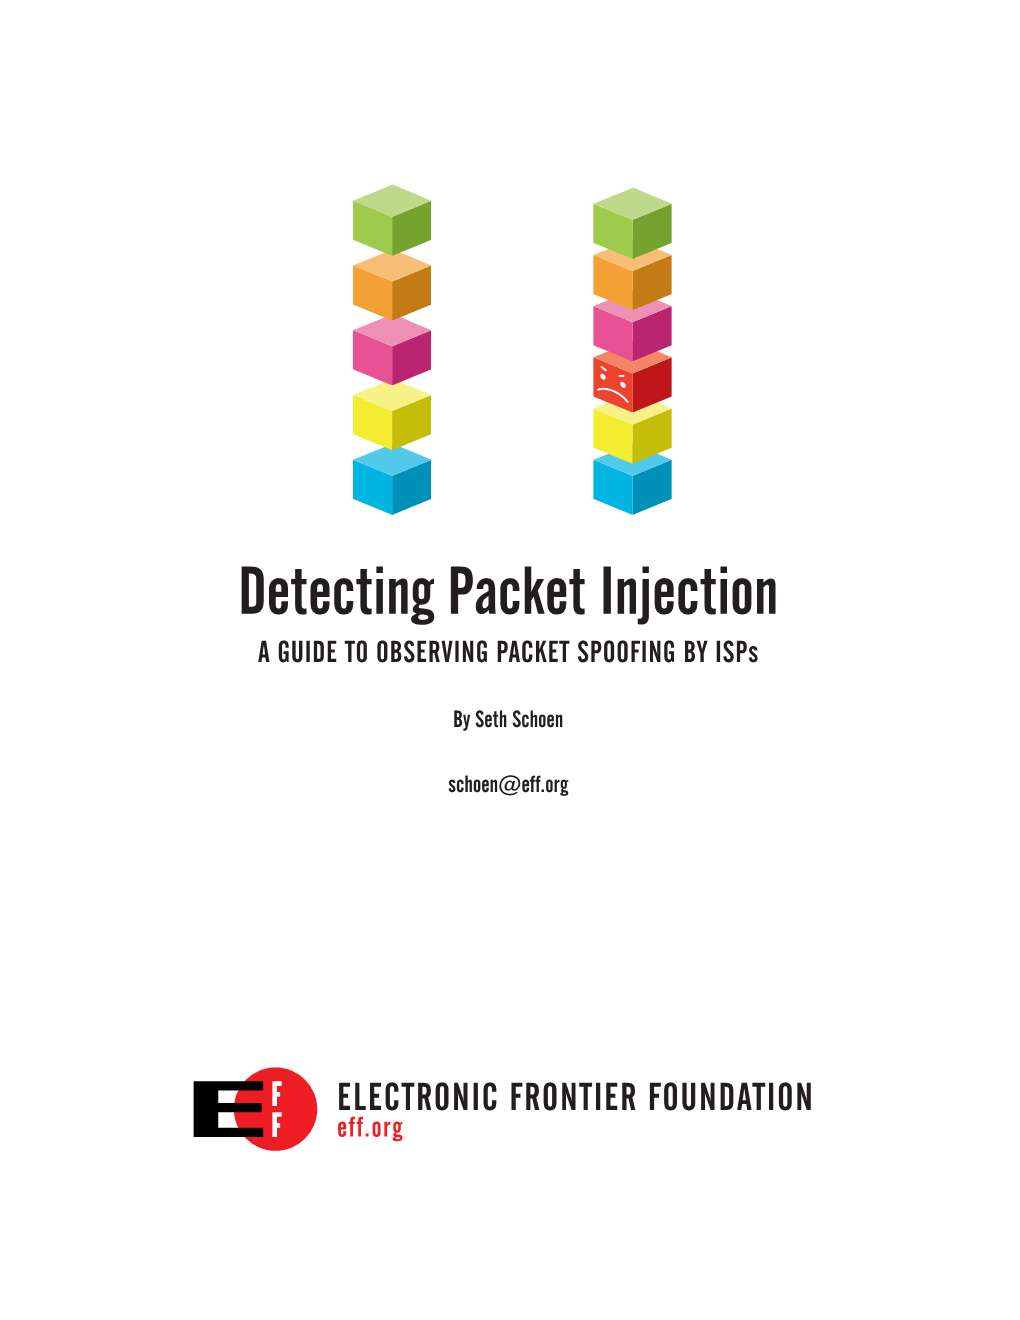 Detecting Packet Injection a Guide to Observing Packet Spoofing by Isps